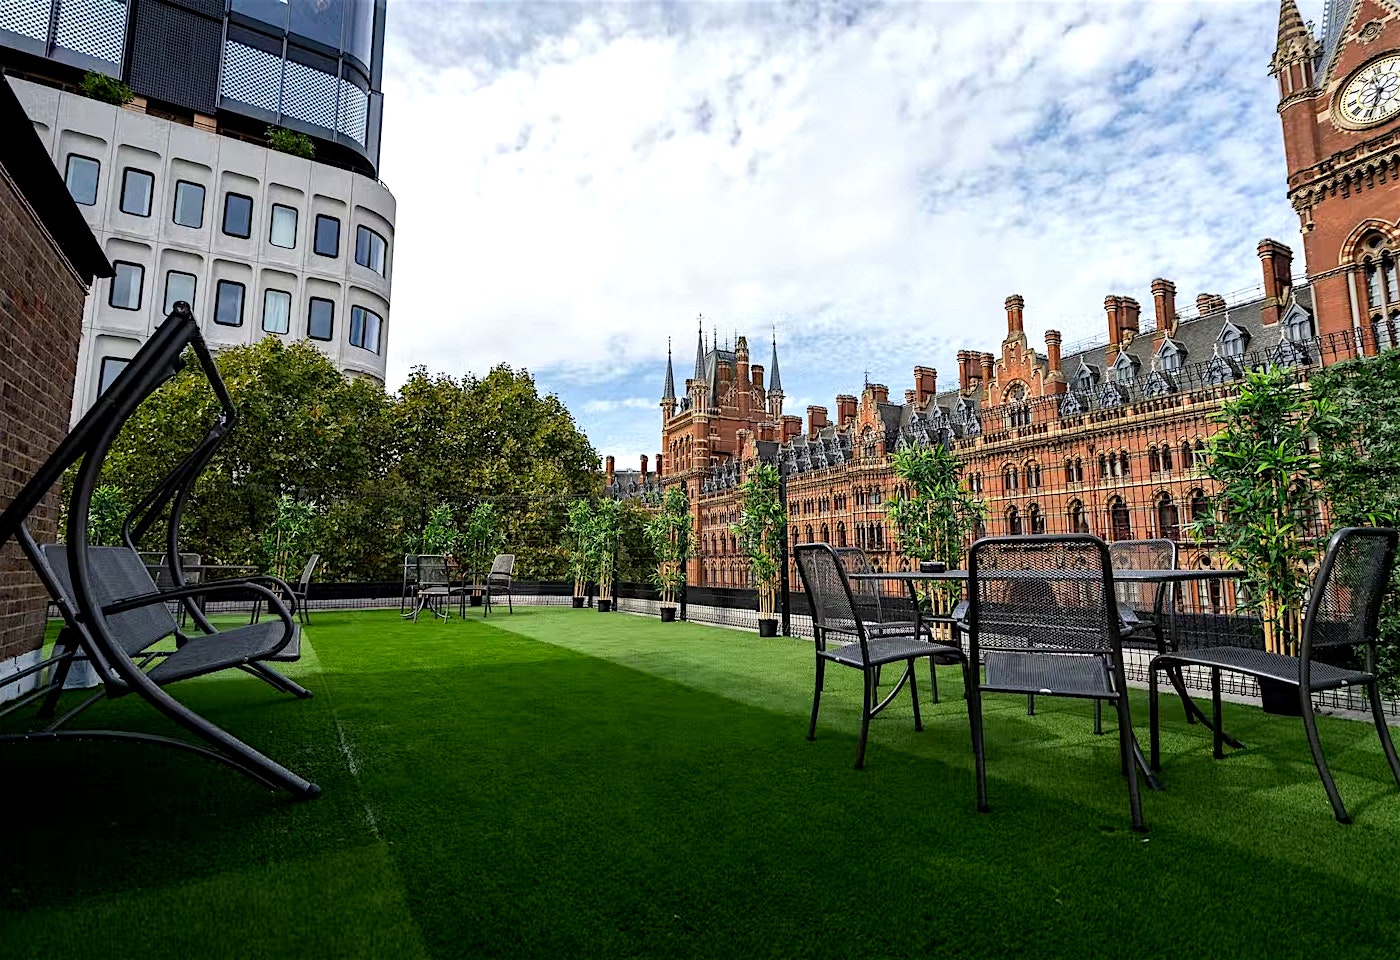 Take a break from your meeting on this open-air terrace